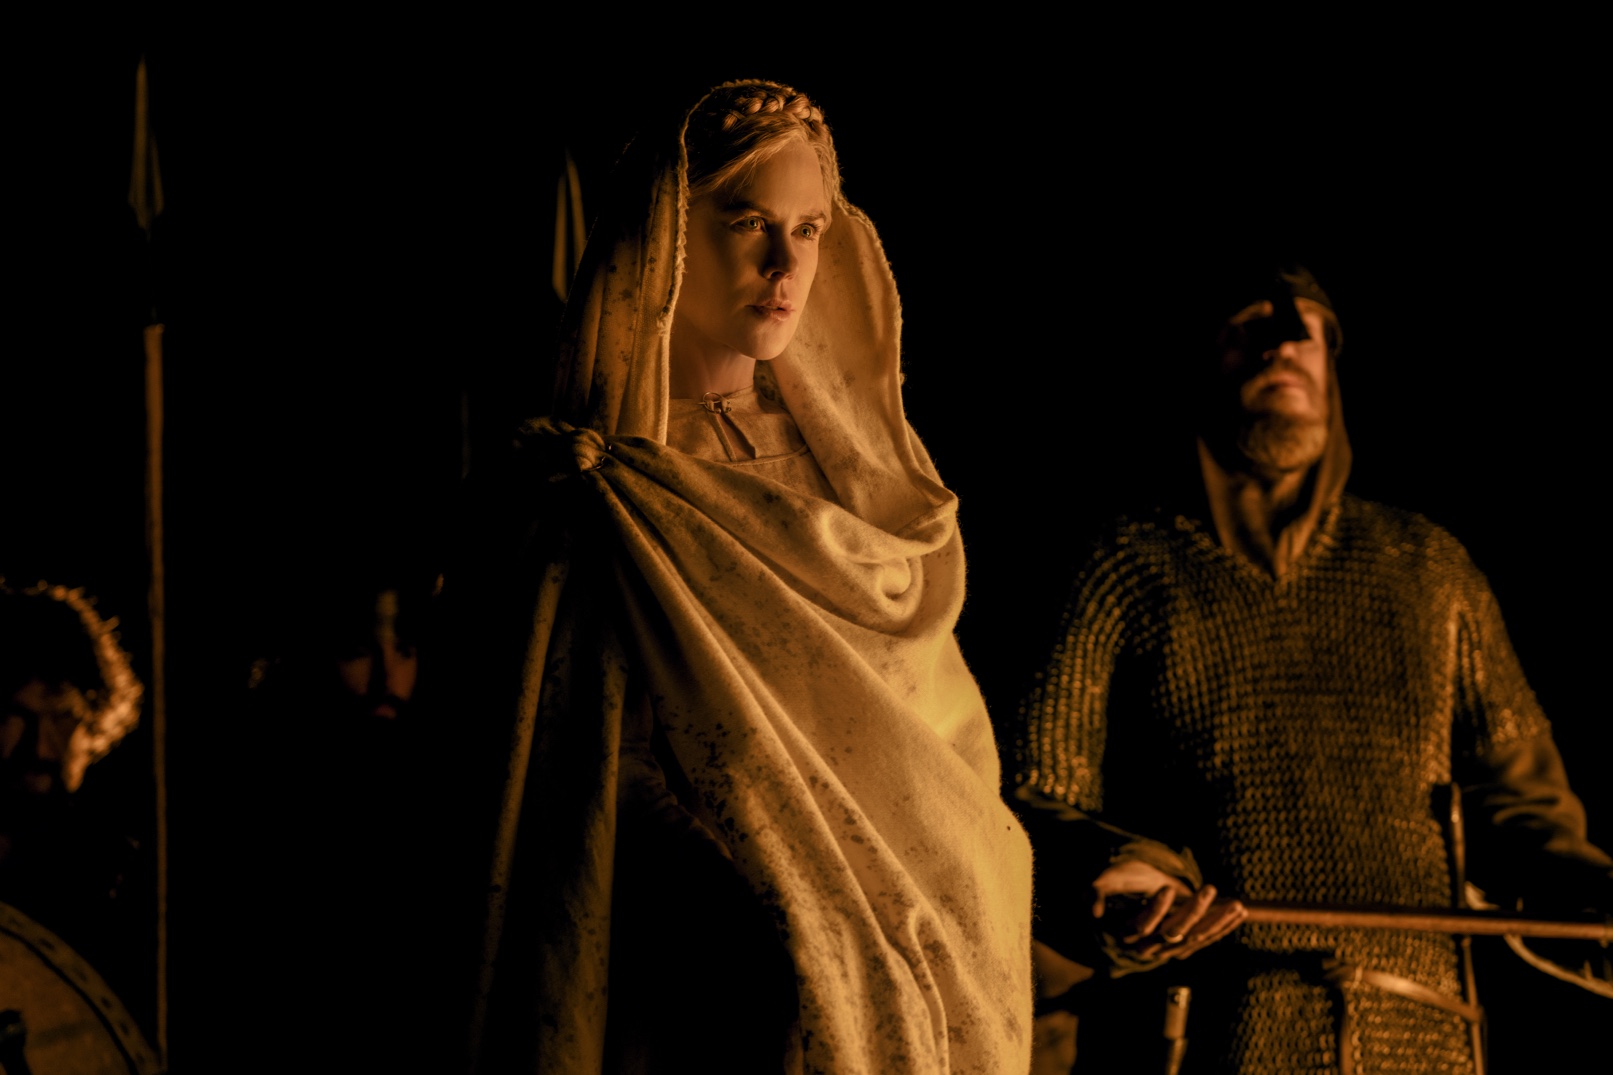 Nicole Kidman as Queen Gudrún, Amleth's mother. (image courtesy of Focus Features)